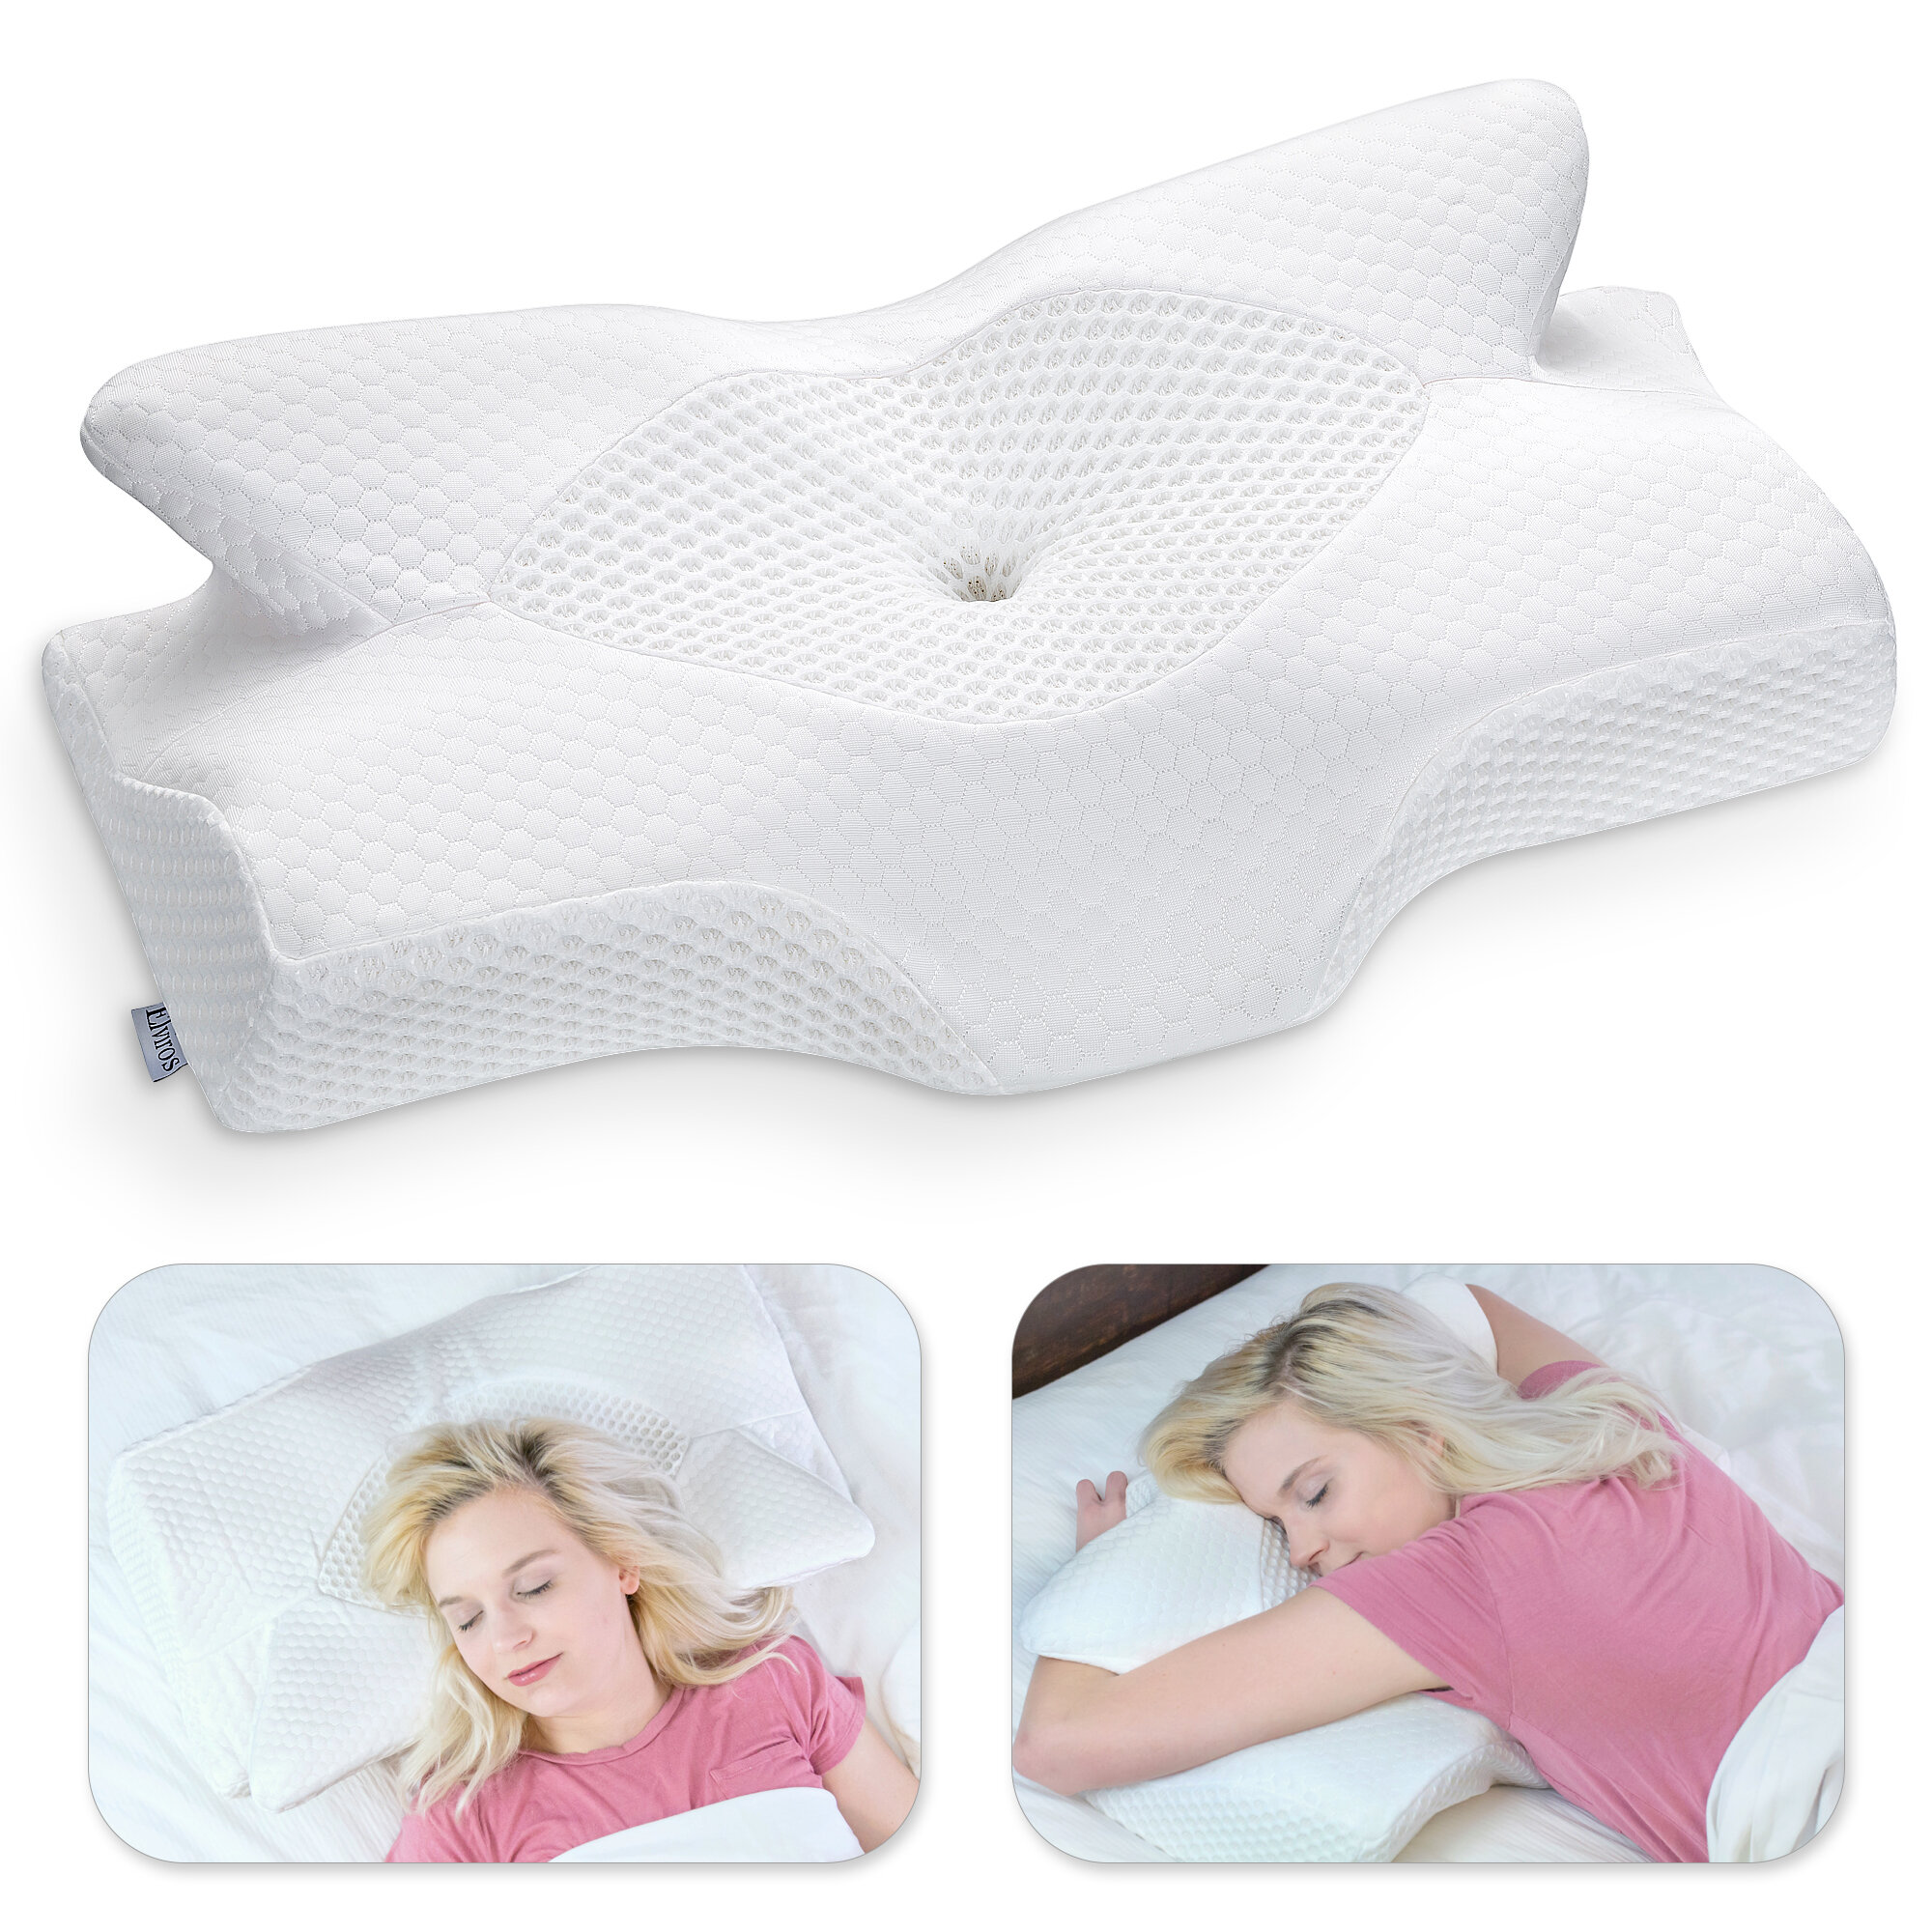 Contour Memory Foam Pillow Neck Back Support Orthopaedic Firm Head My Pillows 